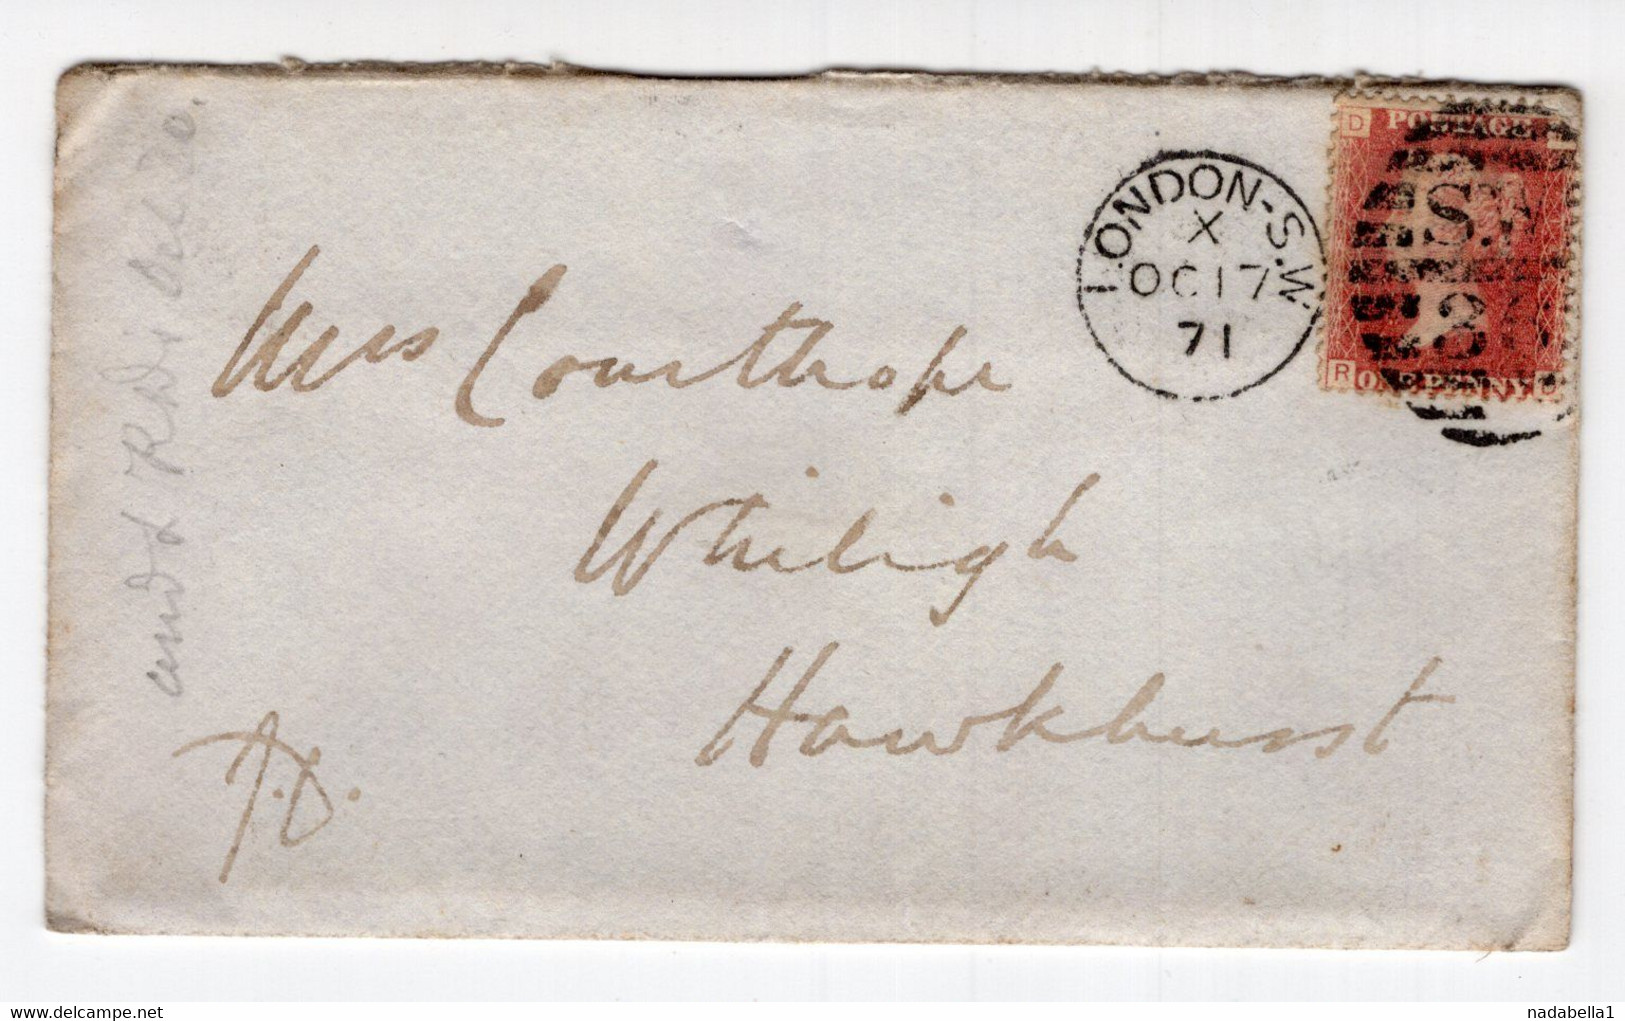 1871. GREAT BRITAIN,LONDON POSTMARK COVER OF SMALL PROPORTIONS,1 PENNY QUEEN VICTORIA - Covers & Documents